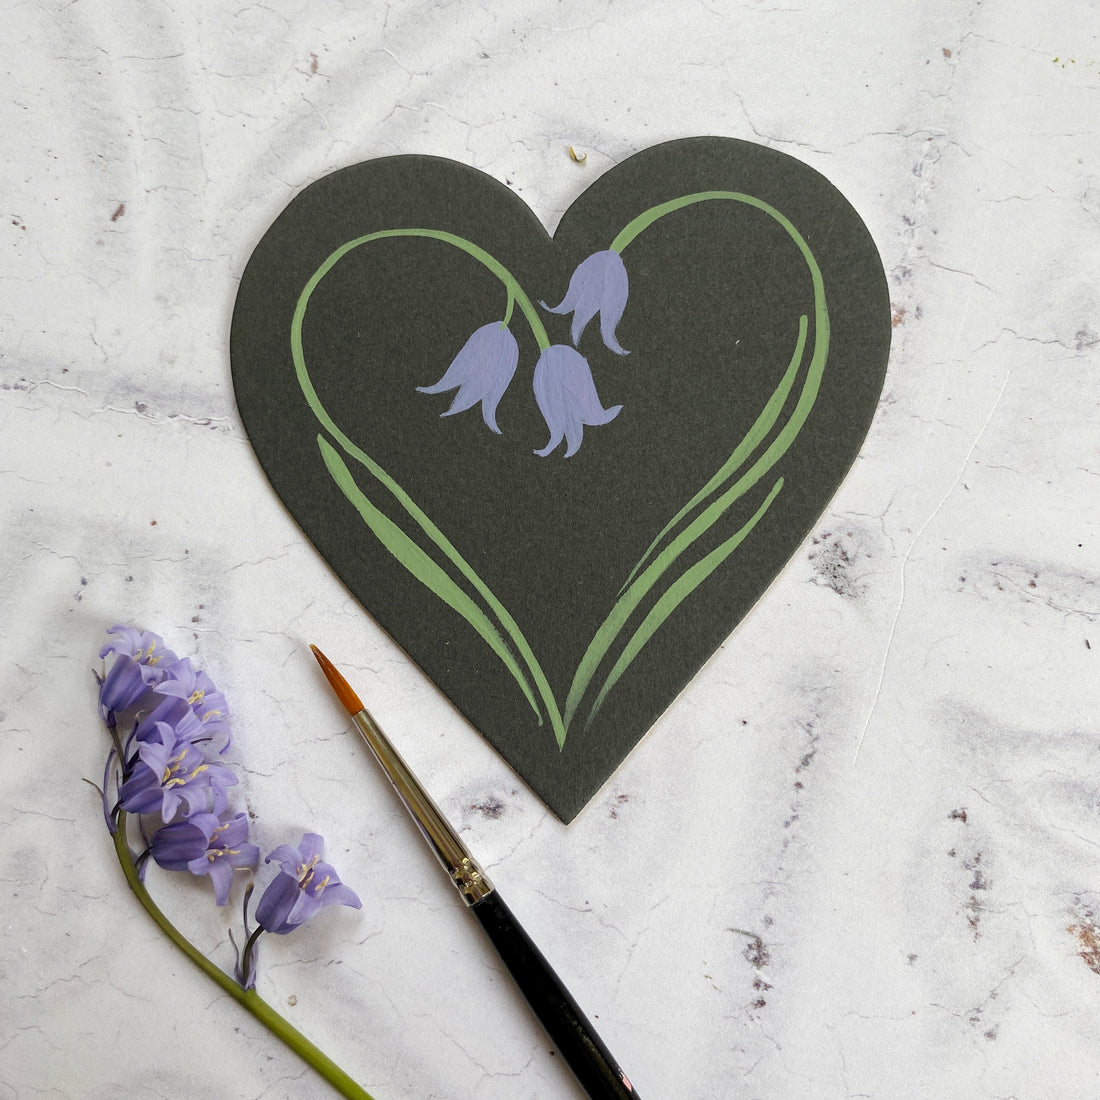 Painted bluebell heart from You Can Folk It next to a paintbrush and bluebells